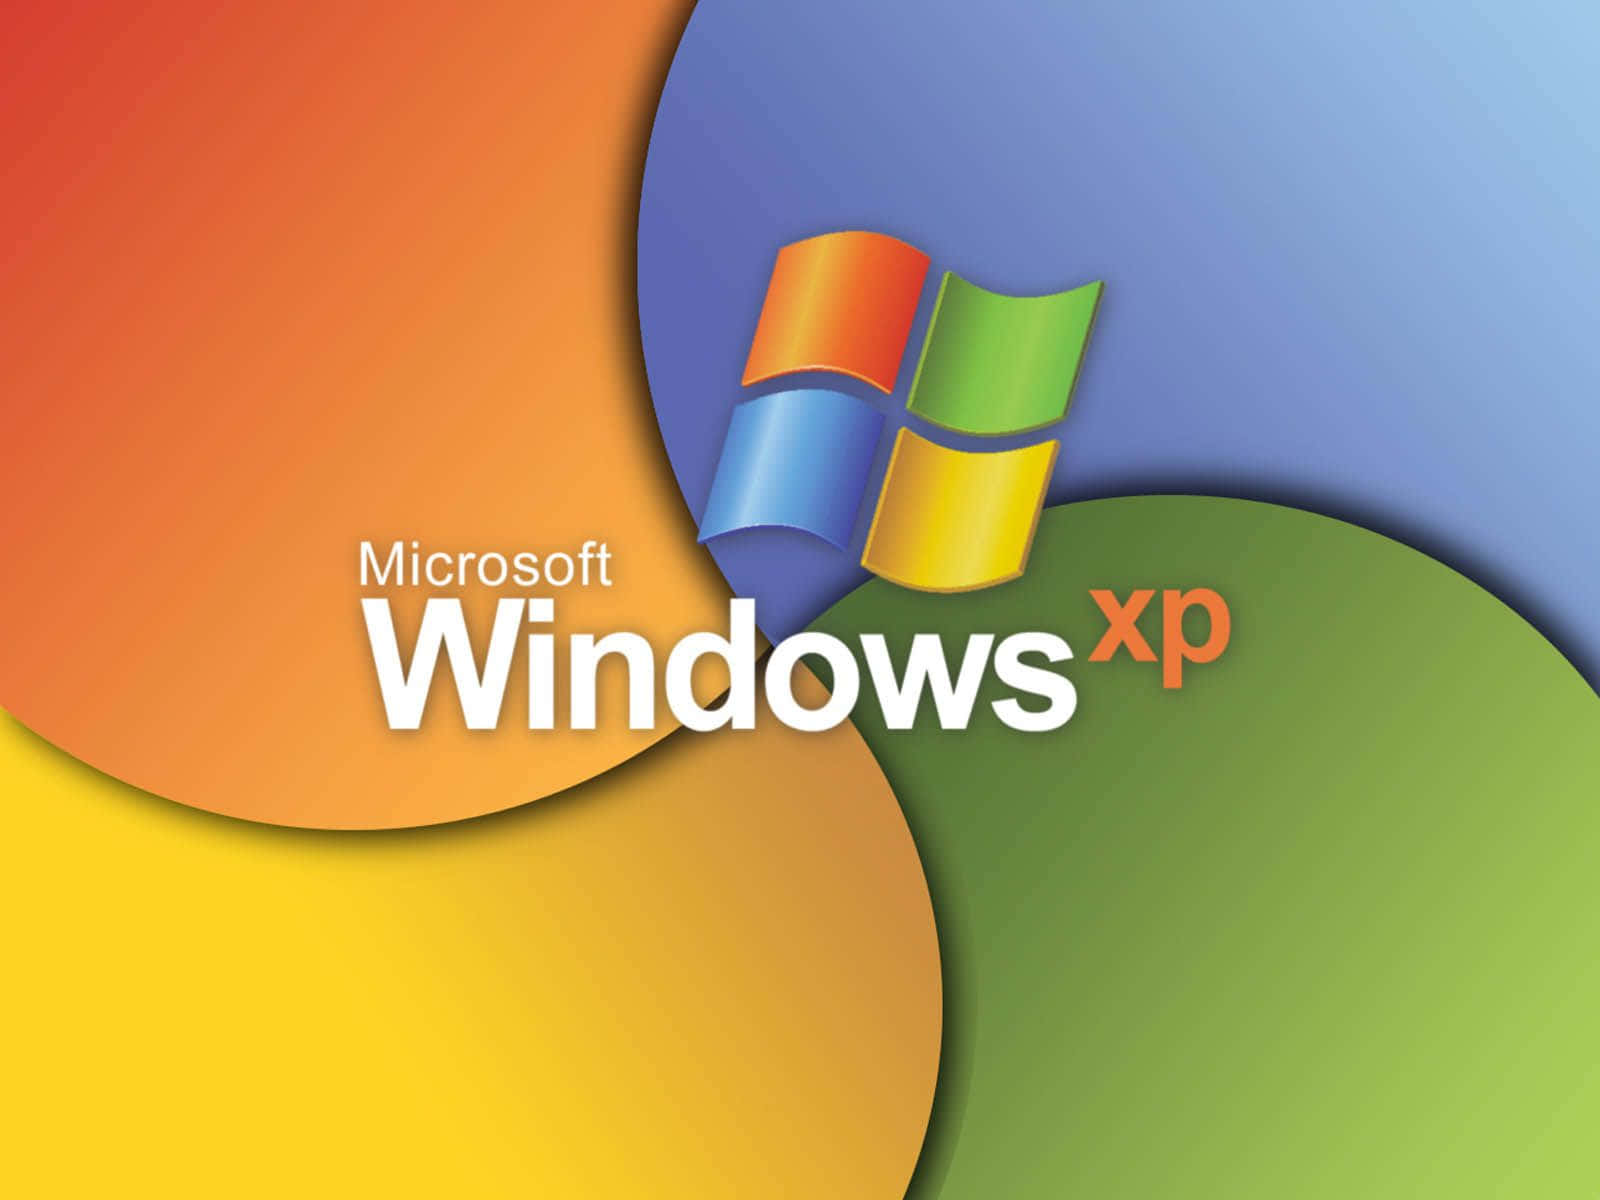 Themes That Take You For a Spin - Windows XP